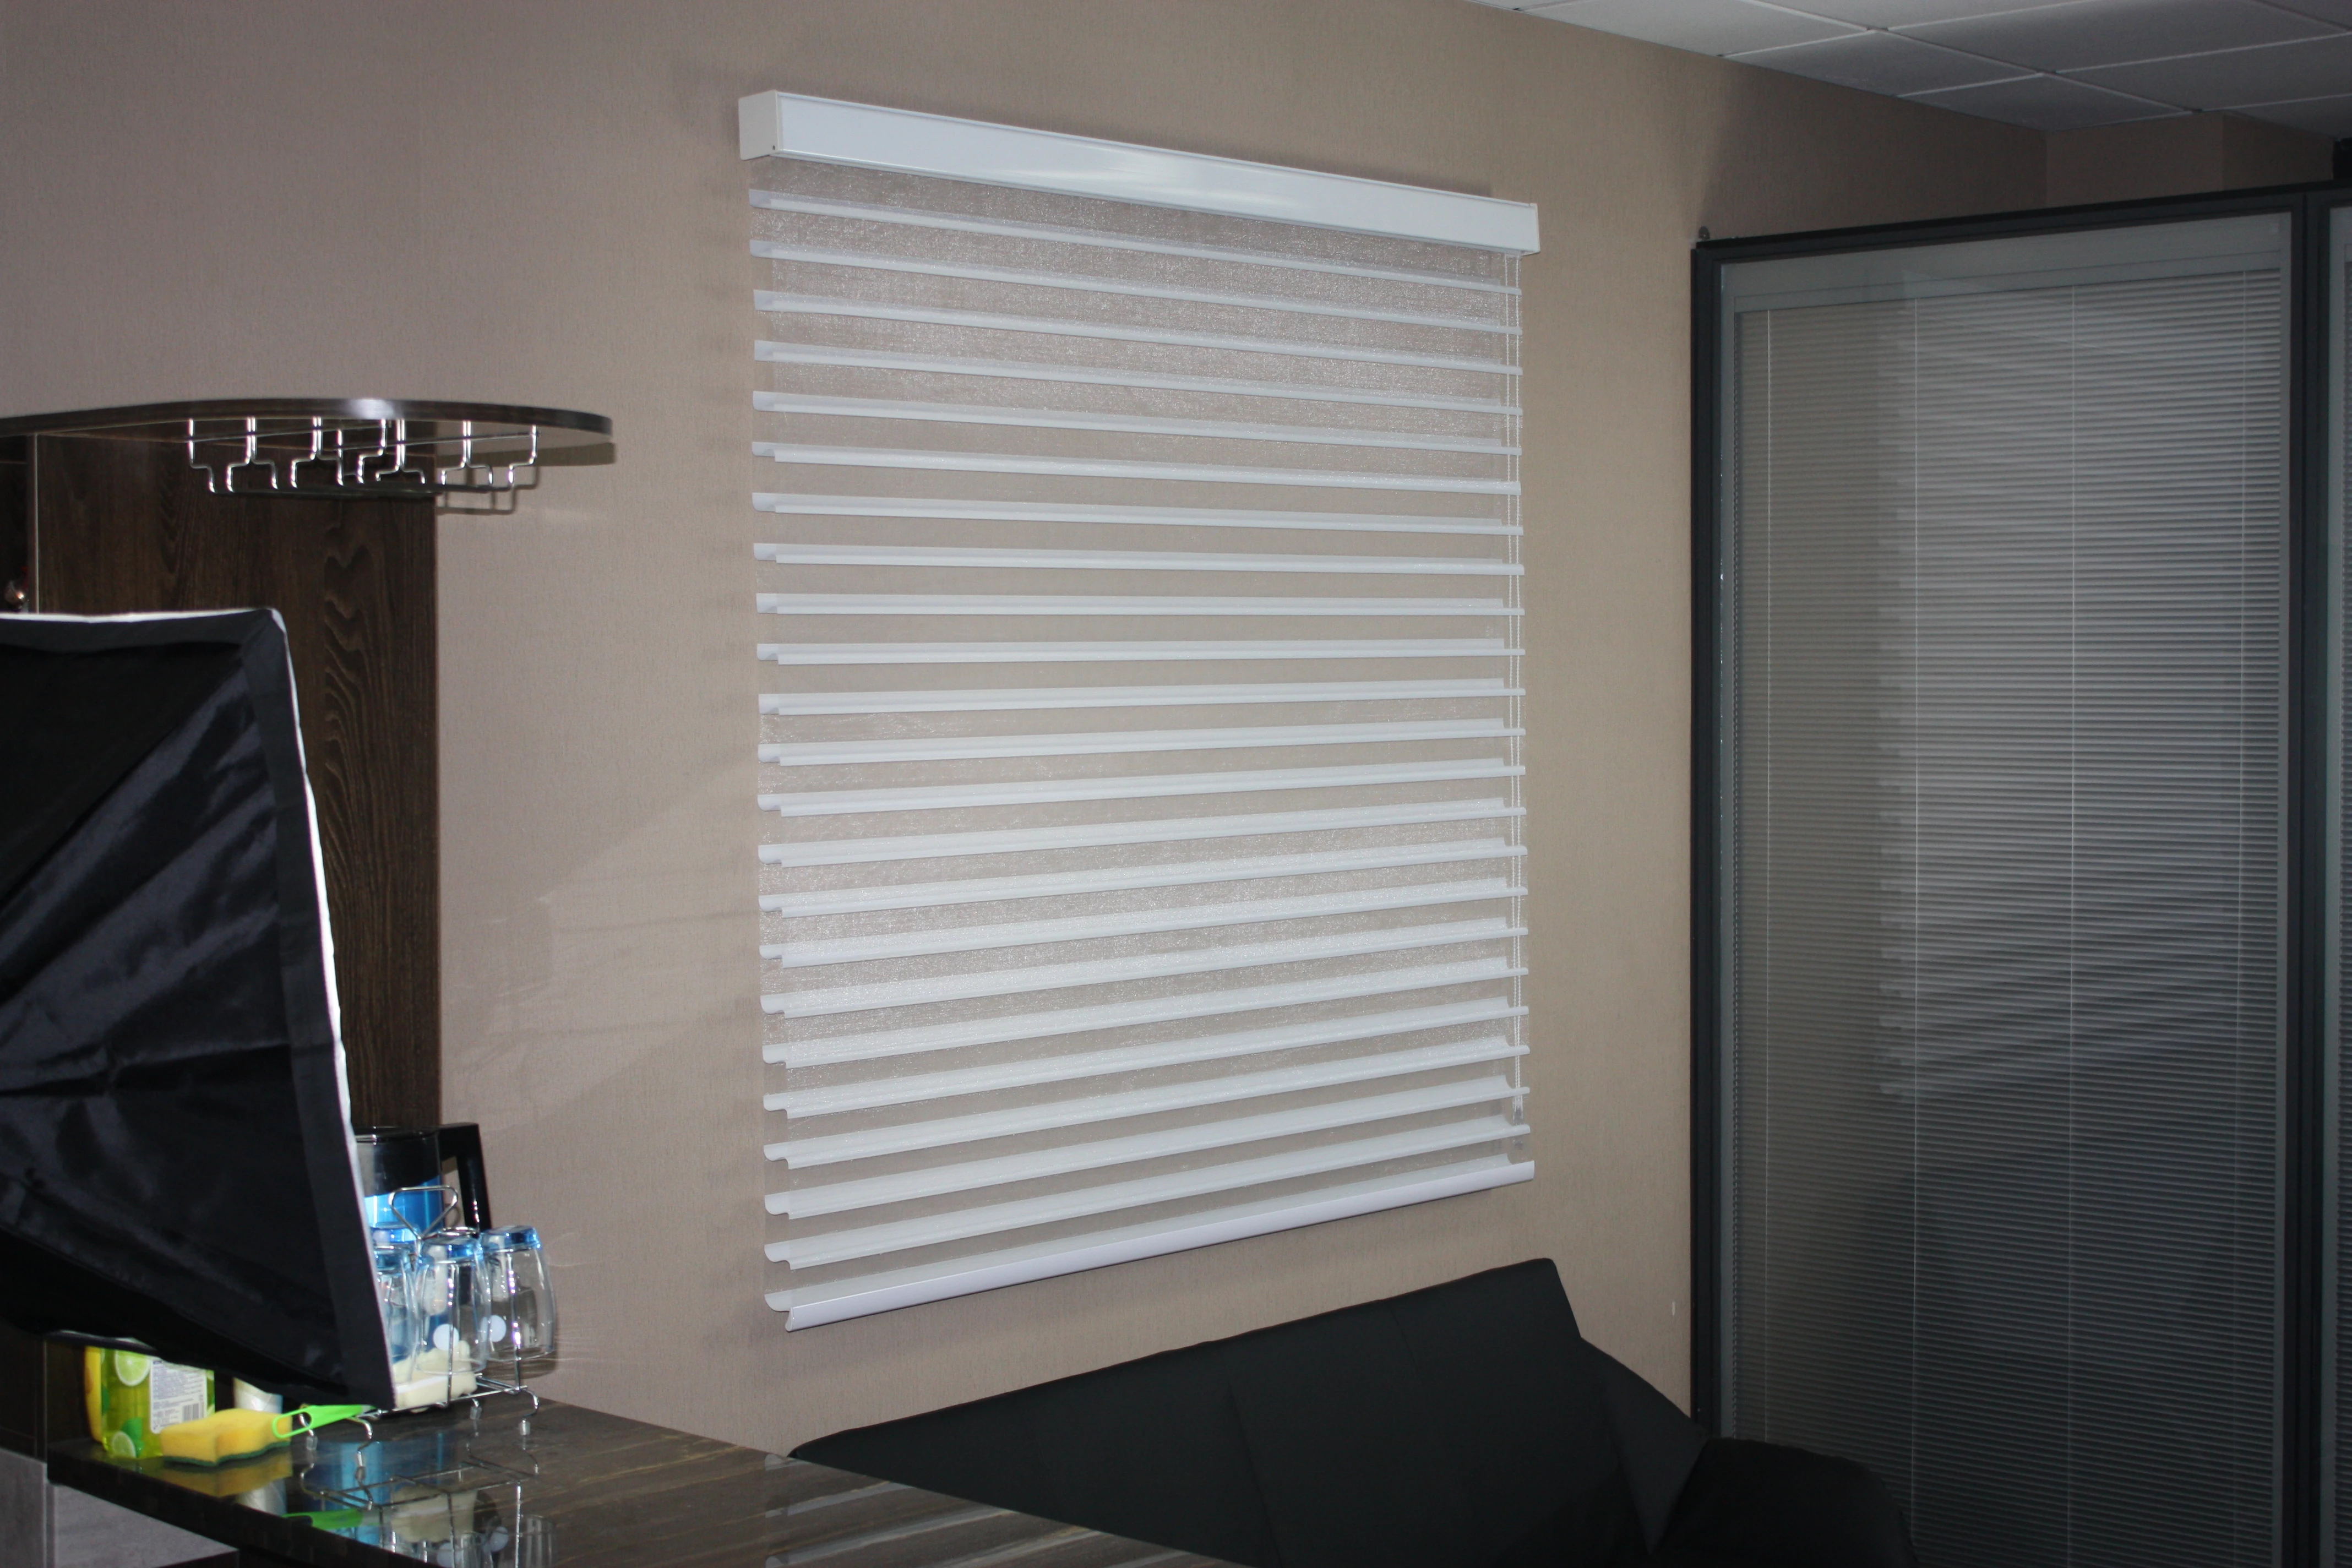 Shining Electric Sheer Shades Silhouette Triple Shades Blinds with Remote Control